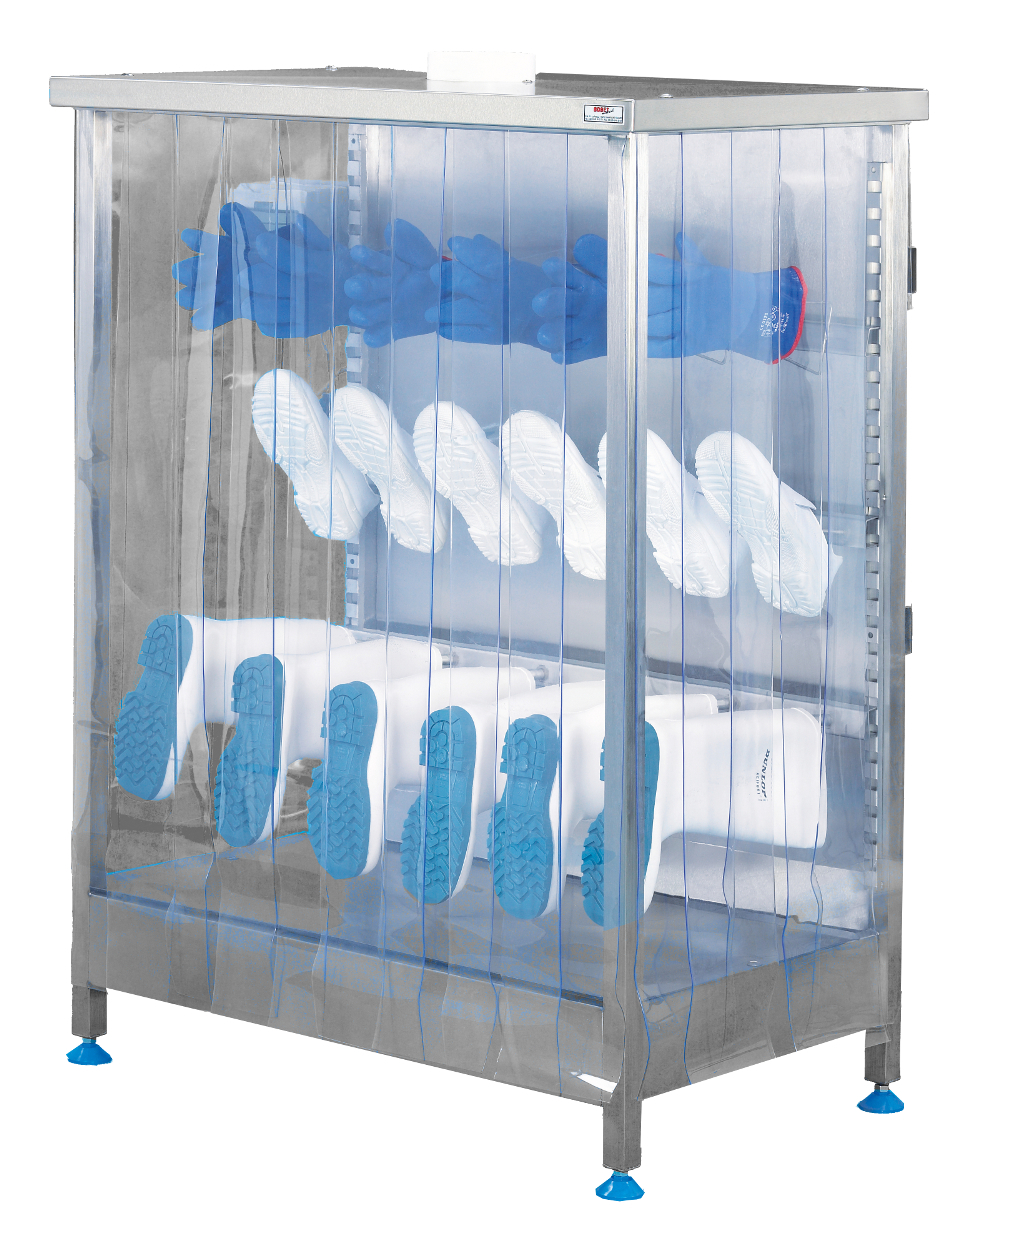 DRYING CABINETS AND BOOT RACKS